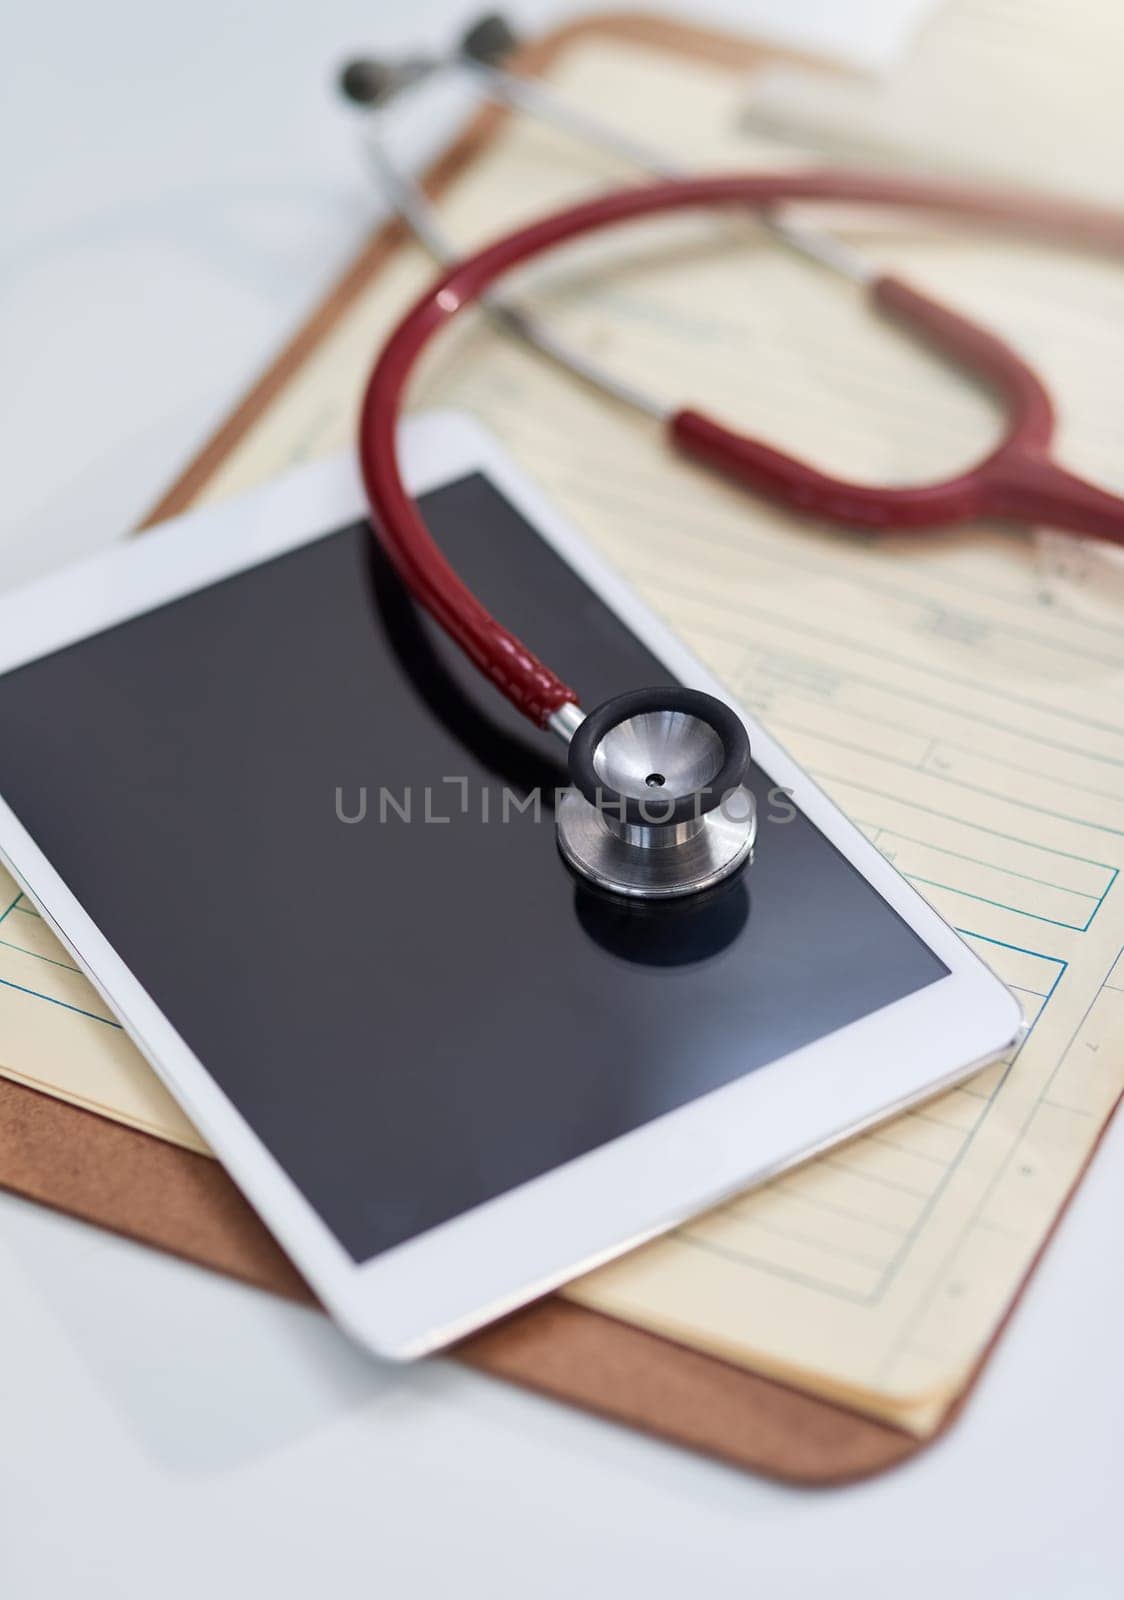 Hospital, clinic and tablet with stethoscope on desk for medical website, telehealth and research. Healthcare, cardiology and digital tech, equipment and clipboard for online consulting service by YuriArcurs